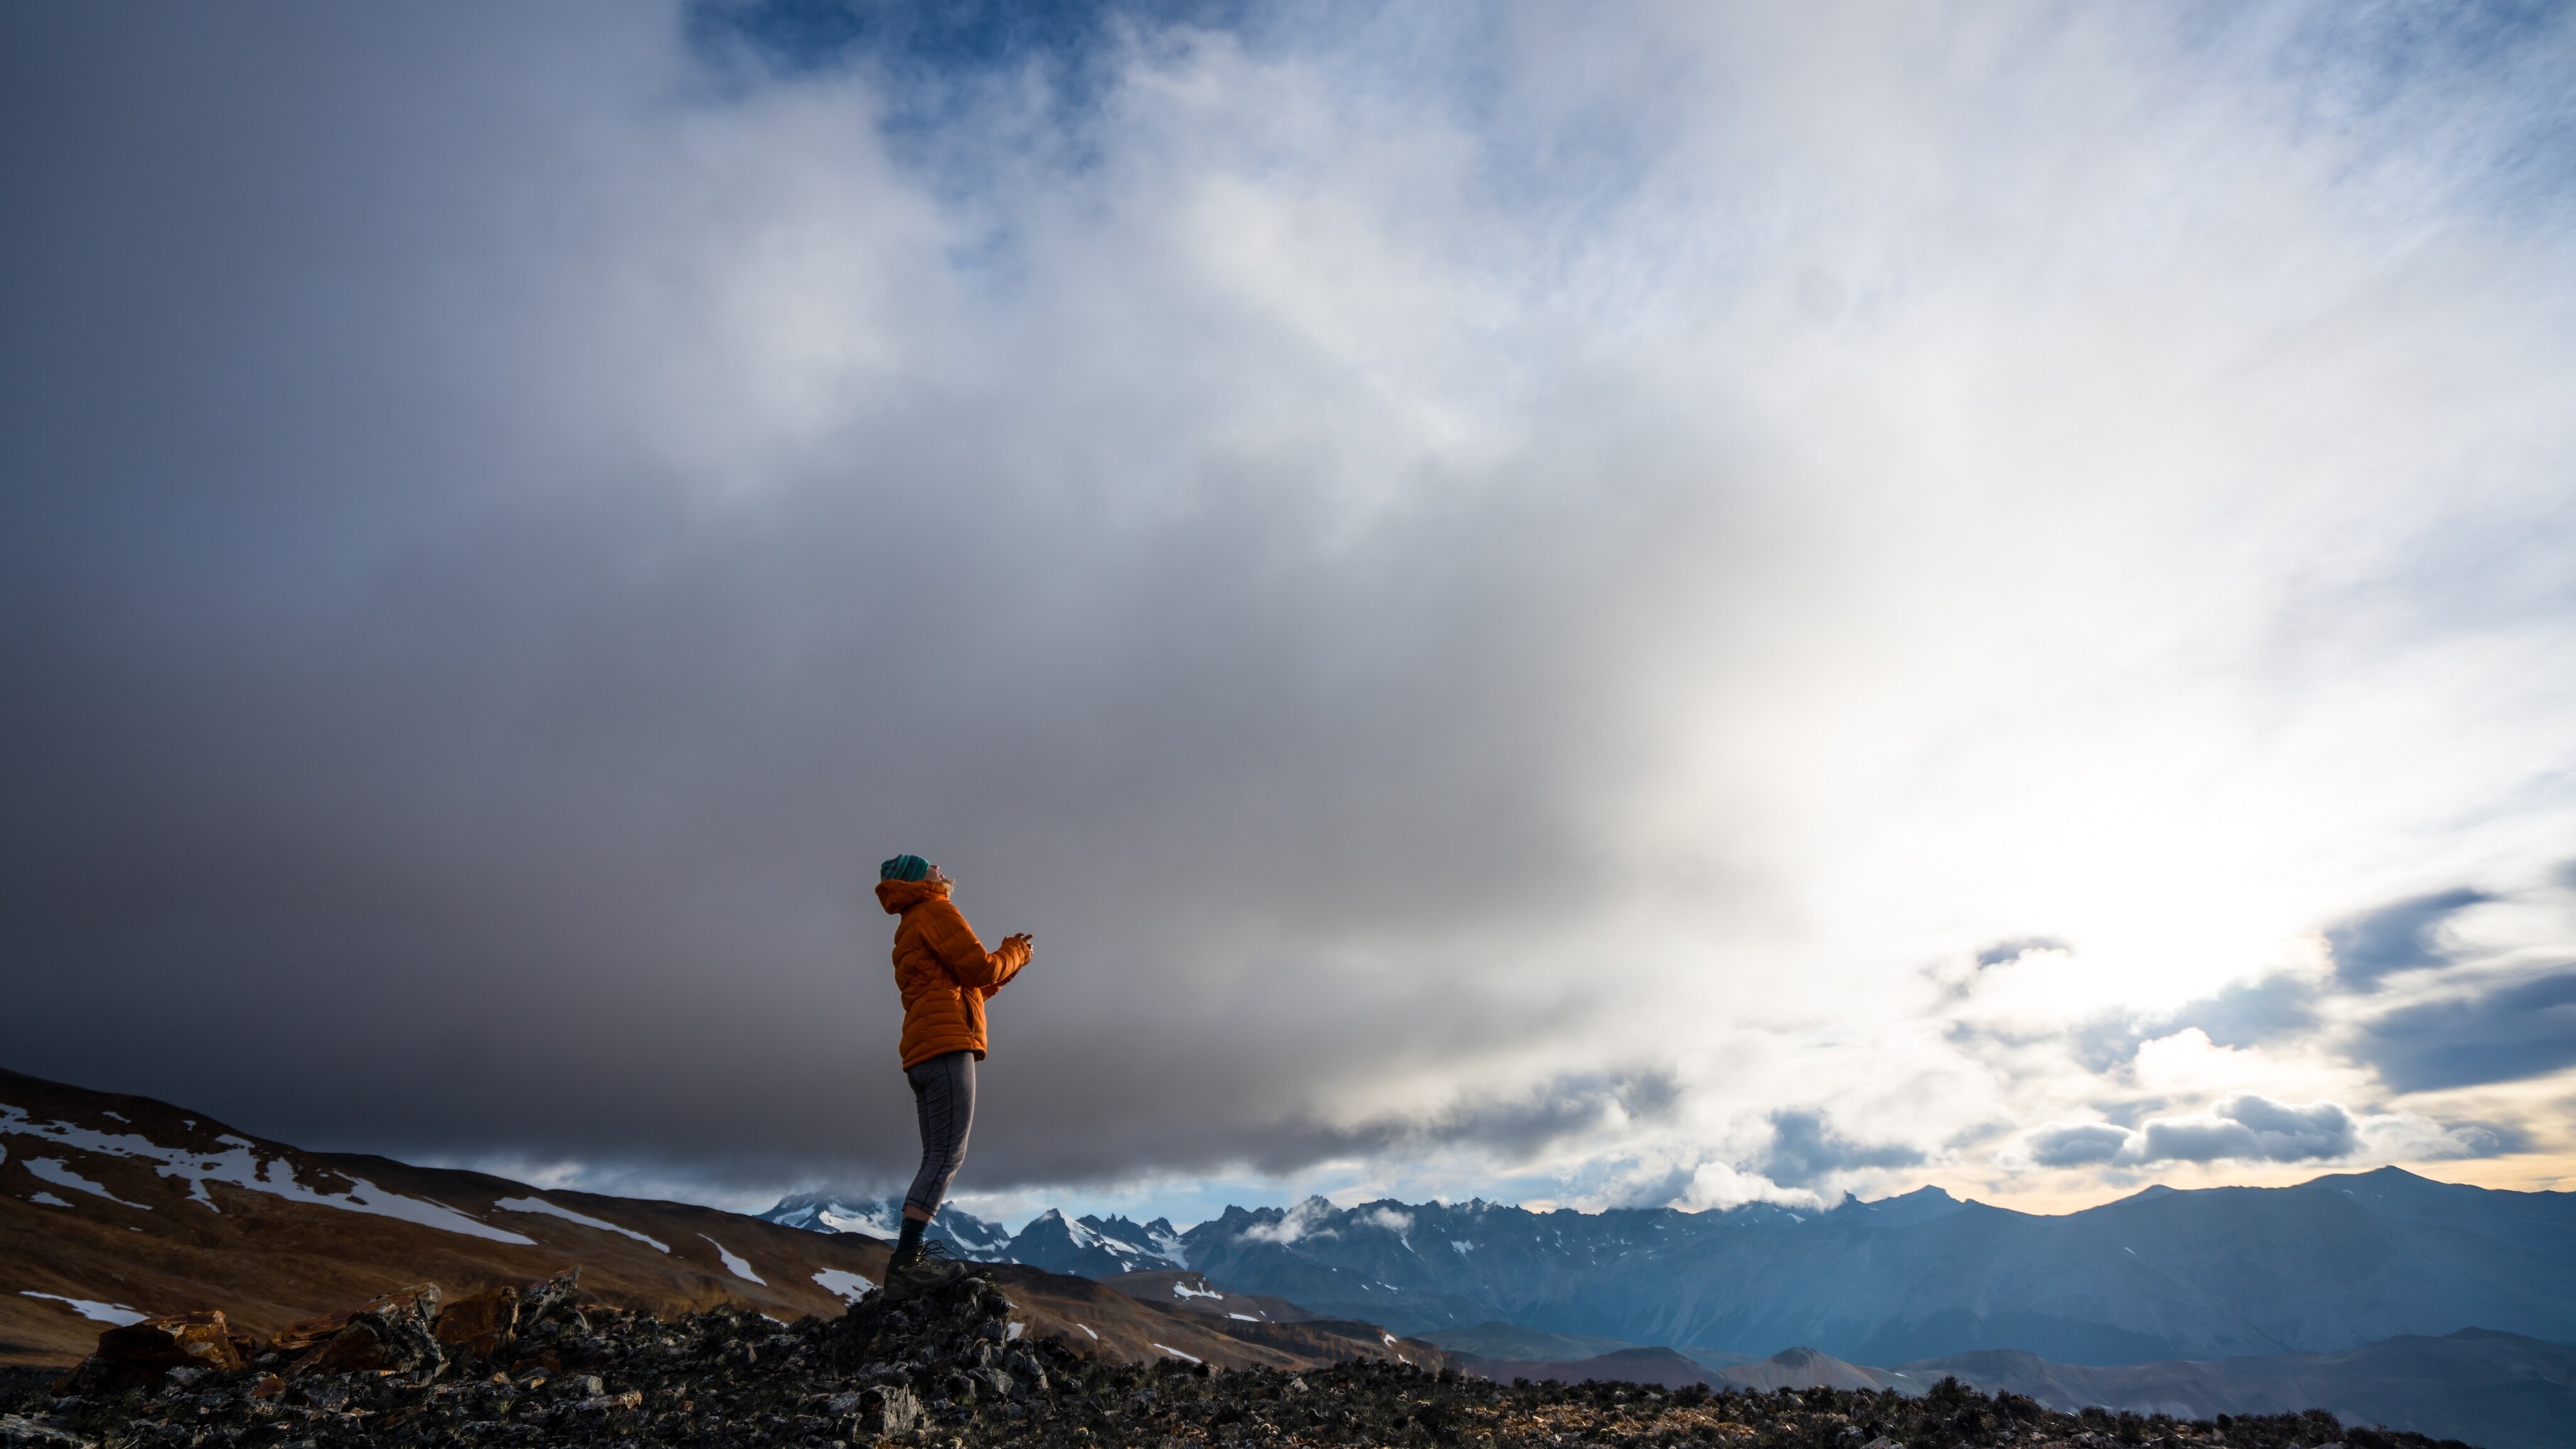 Kris Tompkins looks up at the sky with the Patagonian mountain range as her backdrop. (Jimmy Chin)